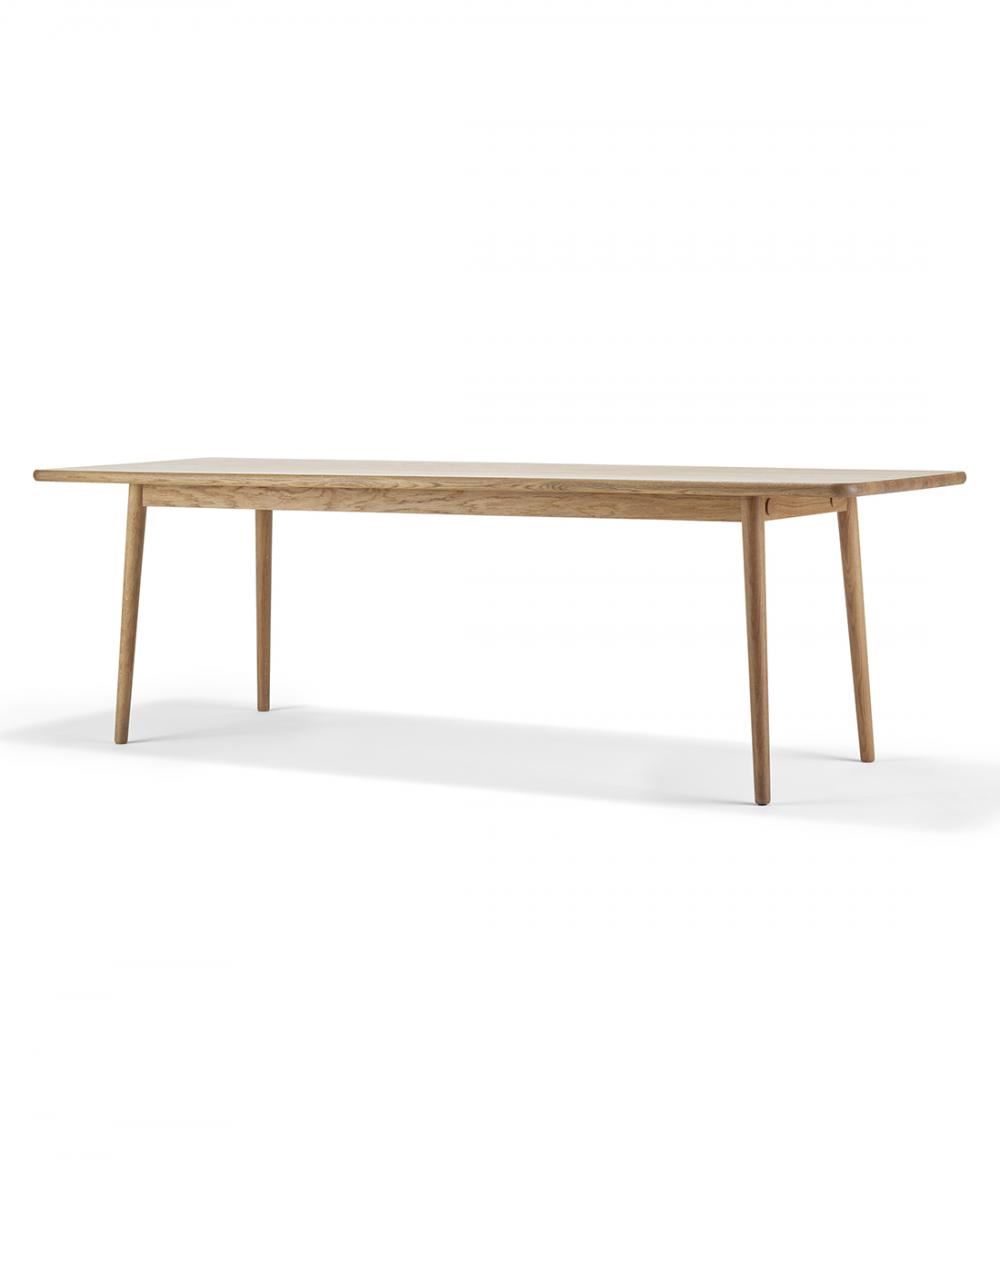 Stolab Miss Holly Table Rectangular Birch 235 X 82cm With 1 Extension Plate Light Wood Designer Furniture From Holloways Of Ludlow